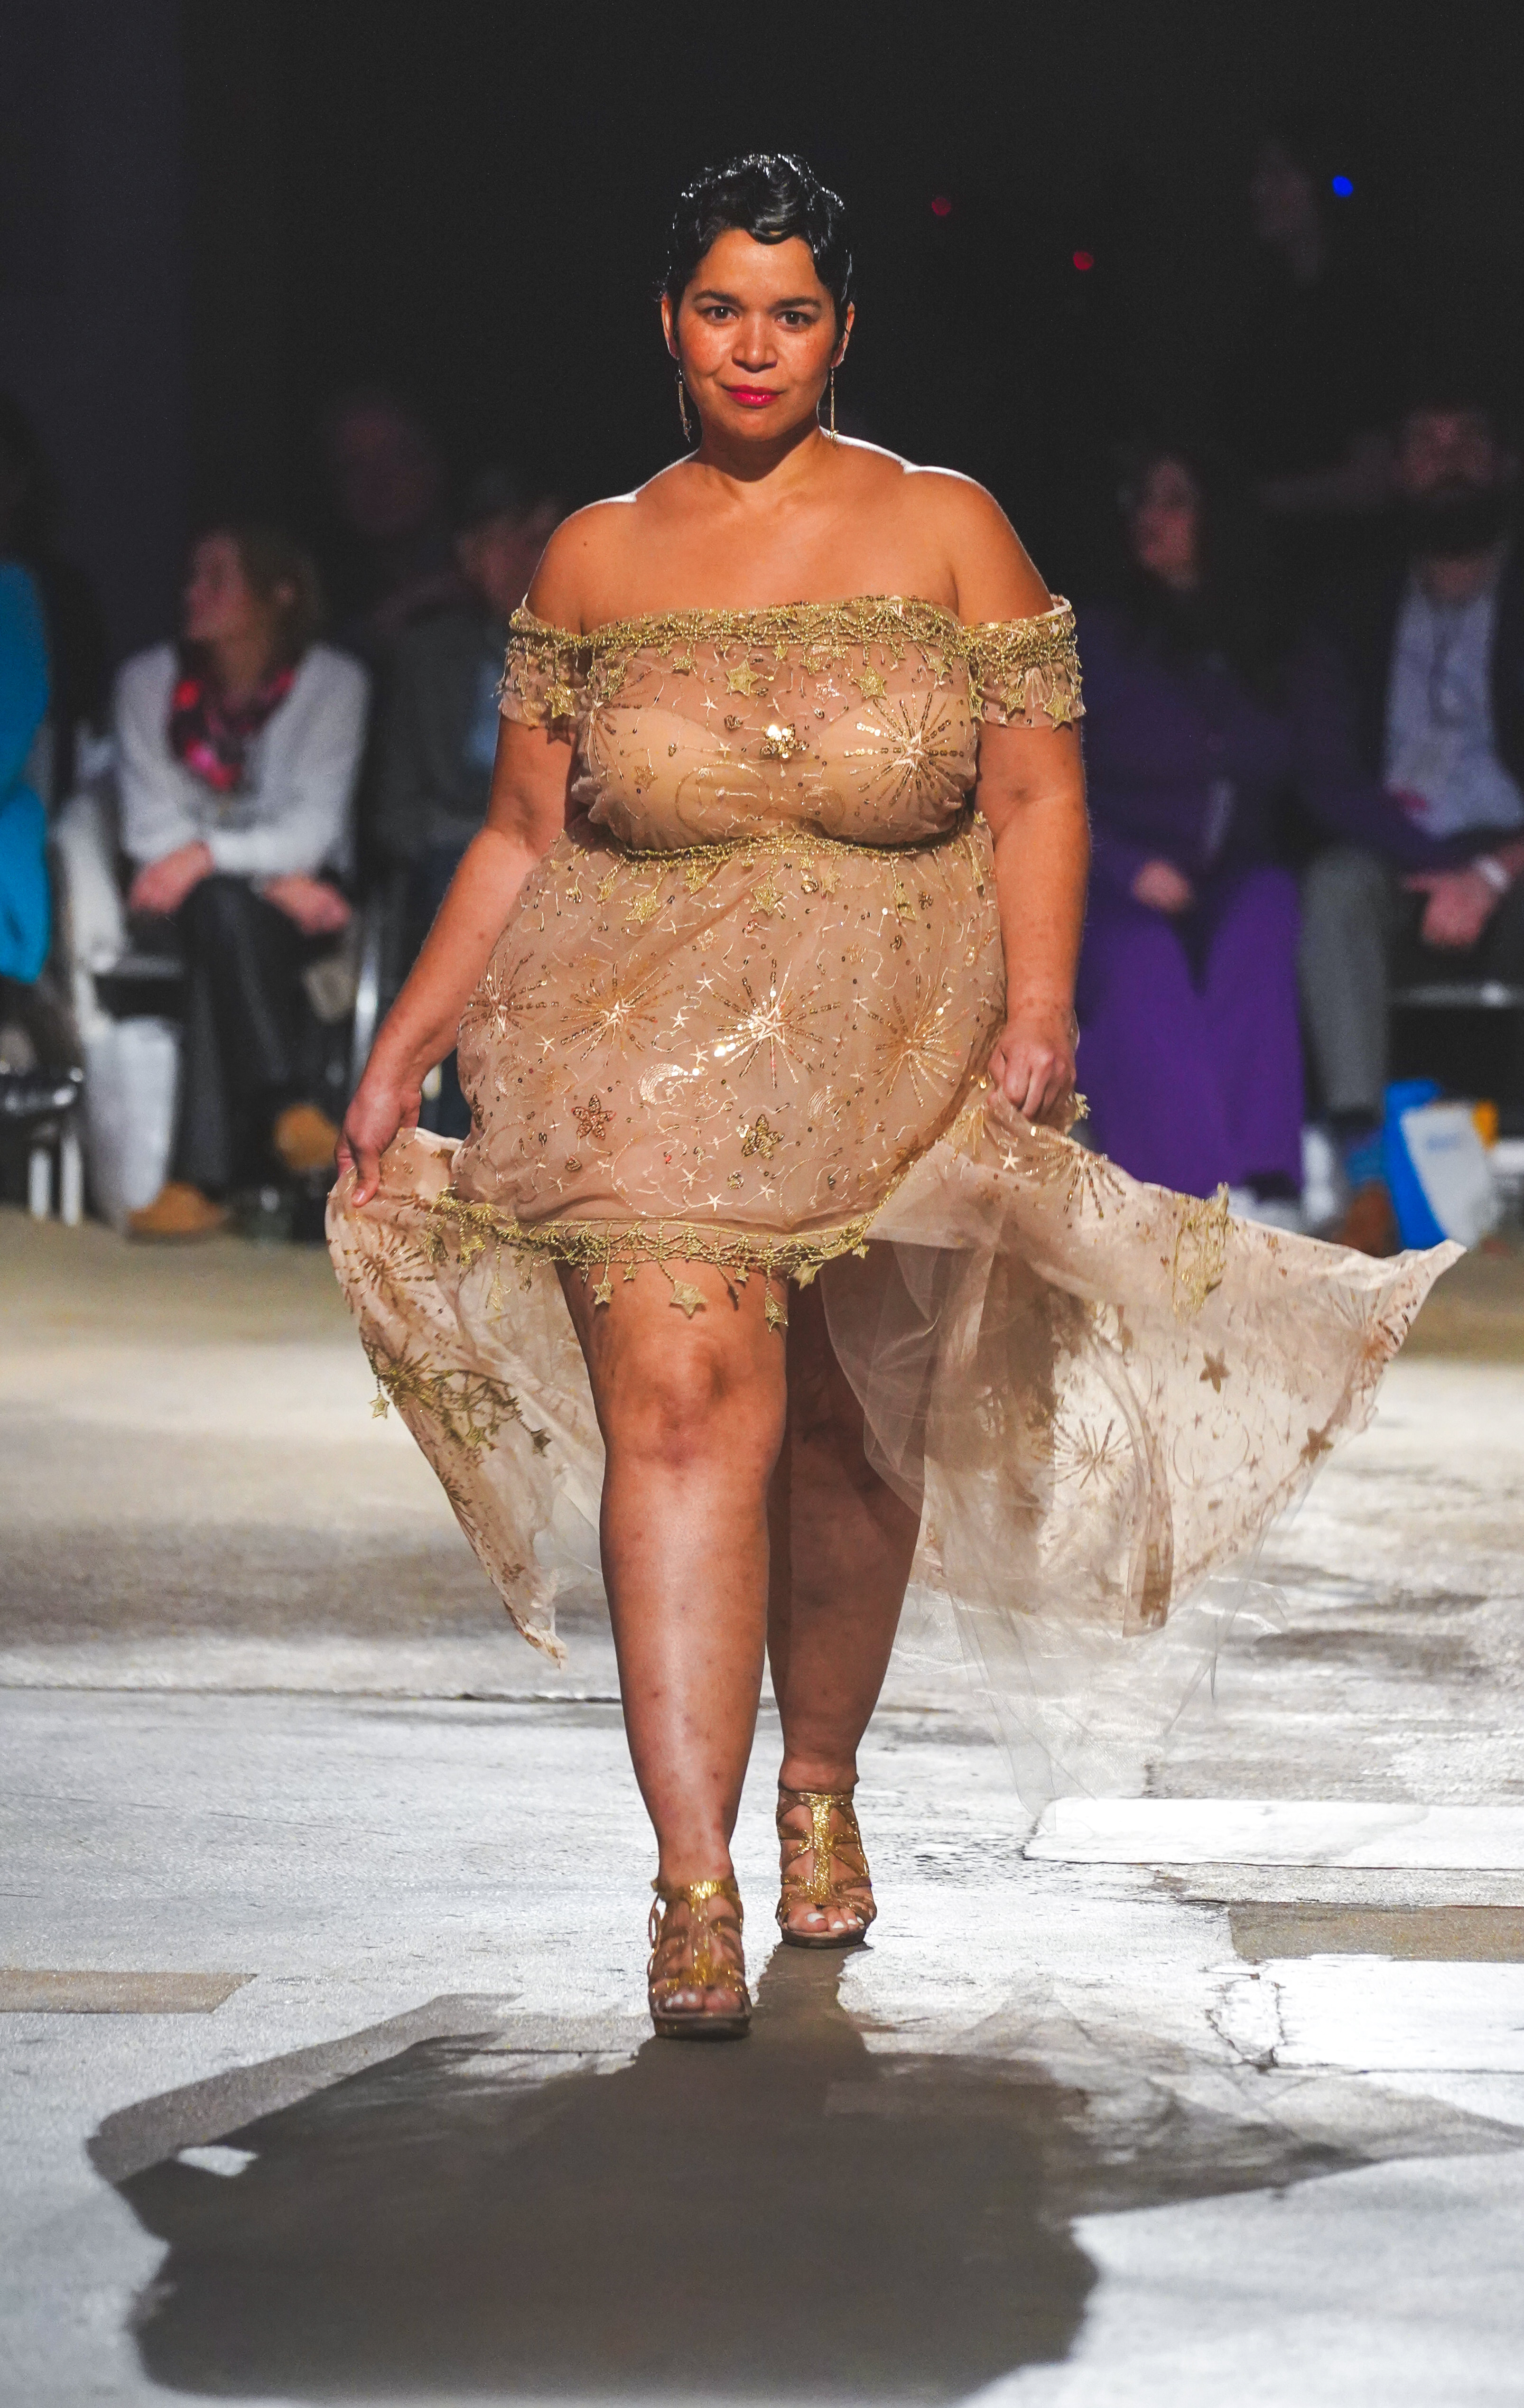 A nude plus size long sleeve beaded evening gown FOR SALE!